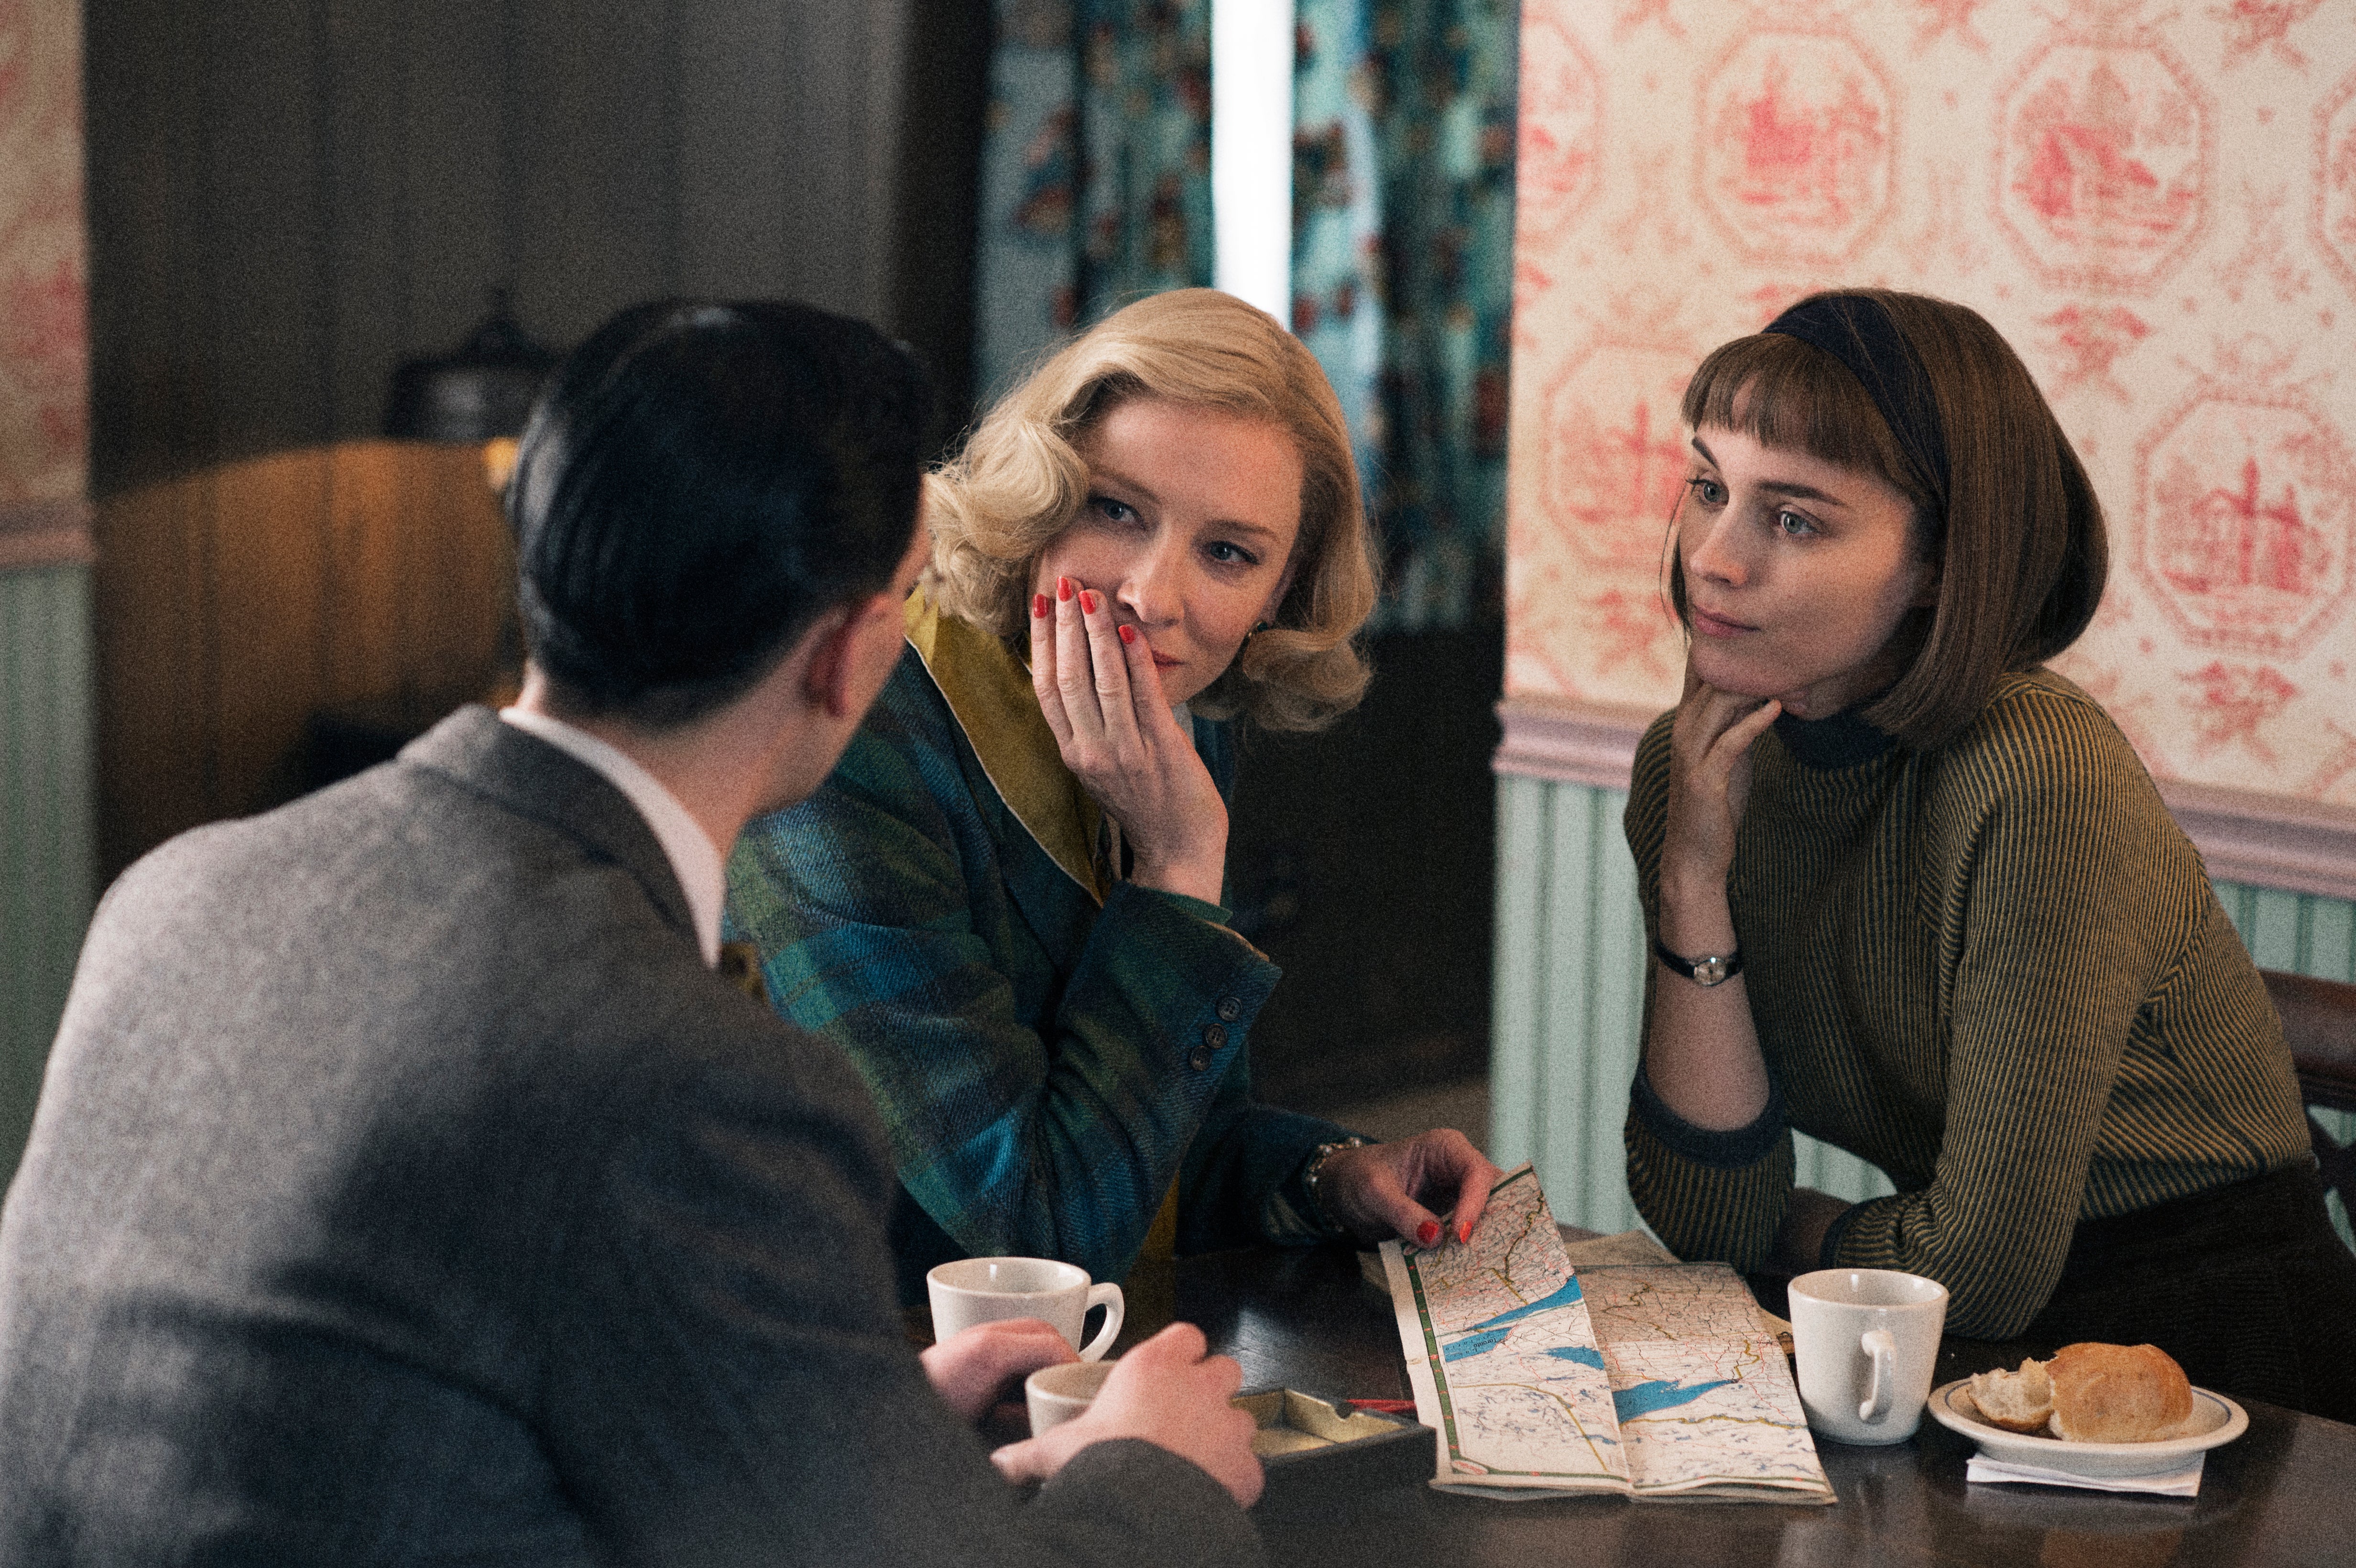 Cate Blanchett as Carol Aird and Rooney Mara as Therese Belivet in ‘Carol’